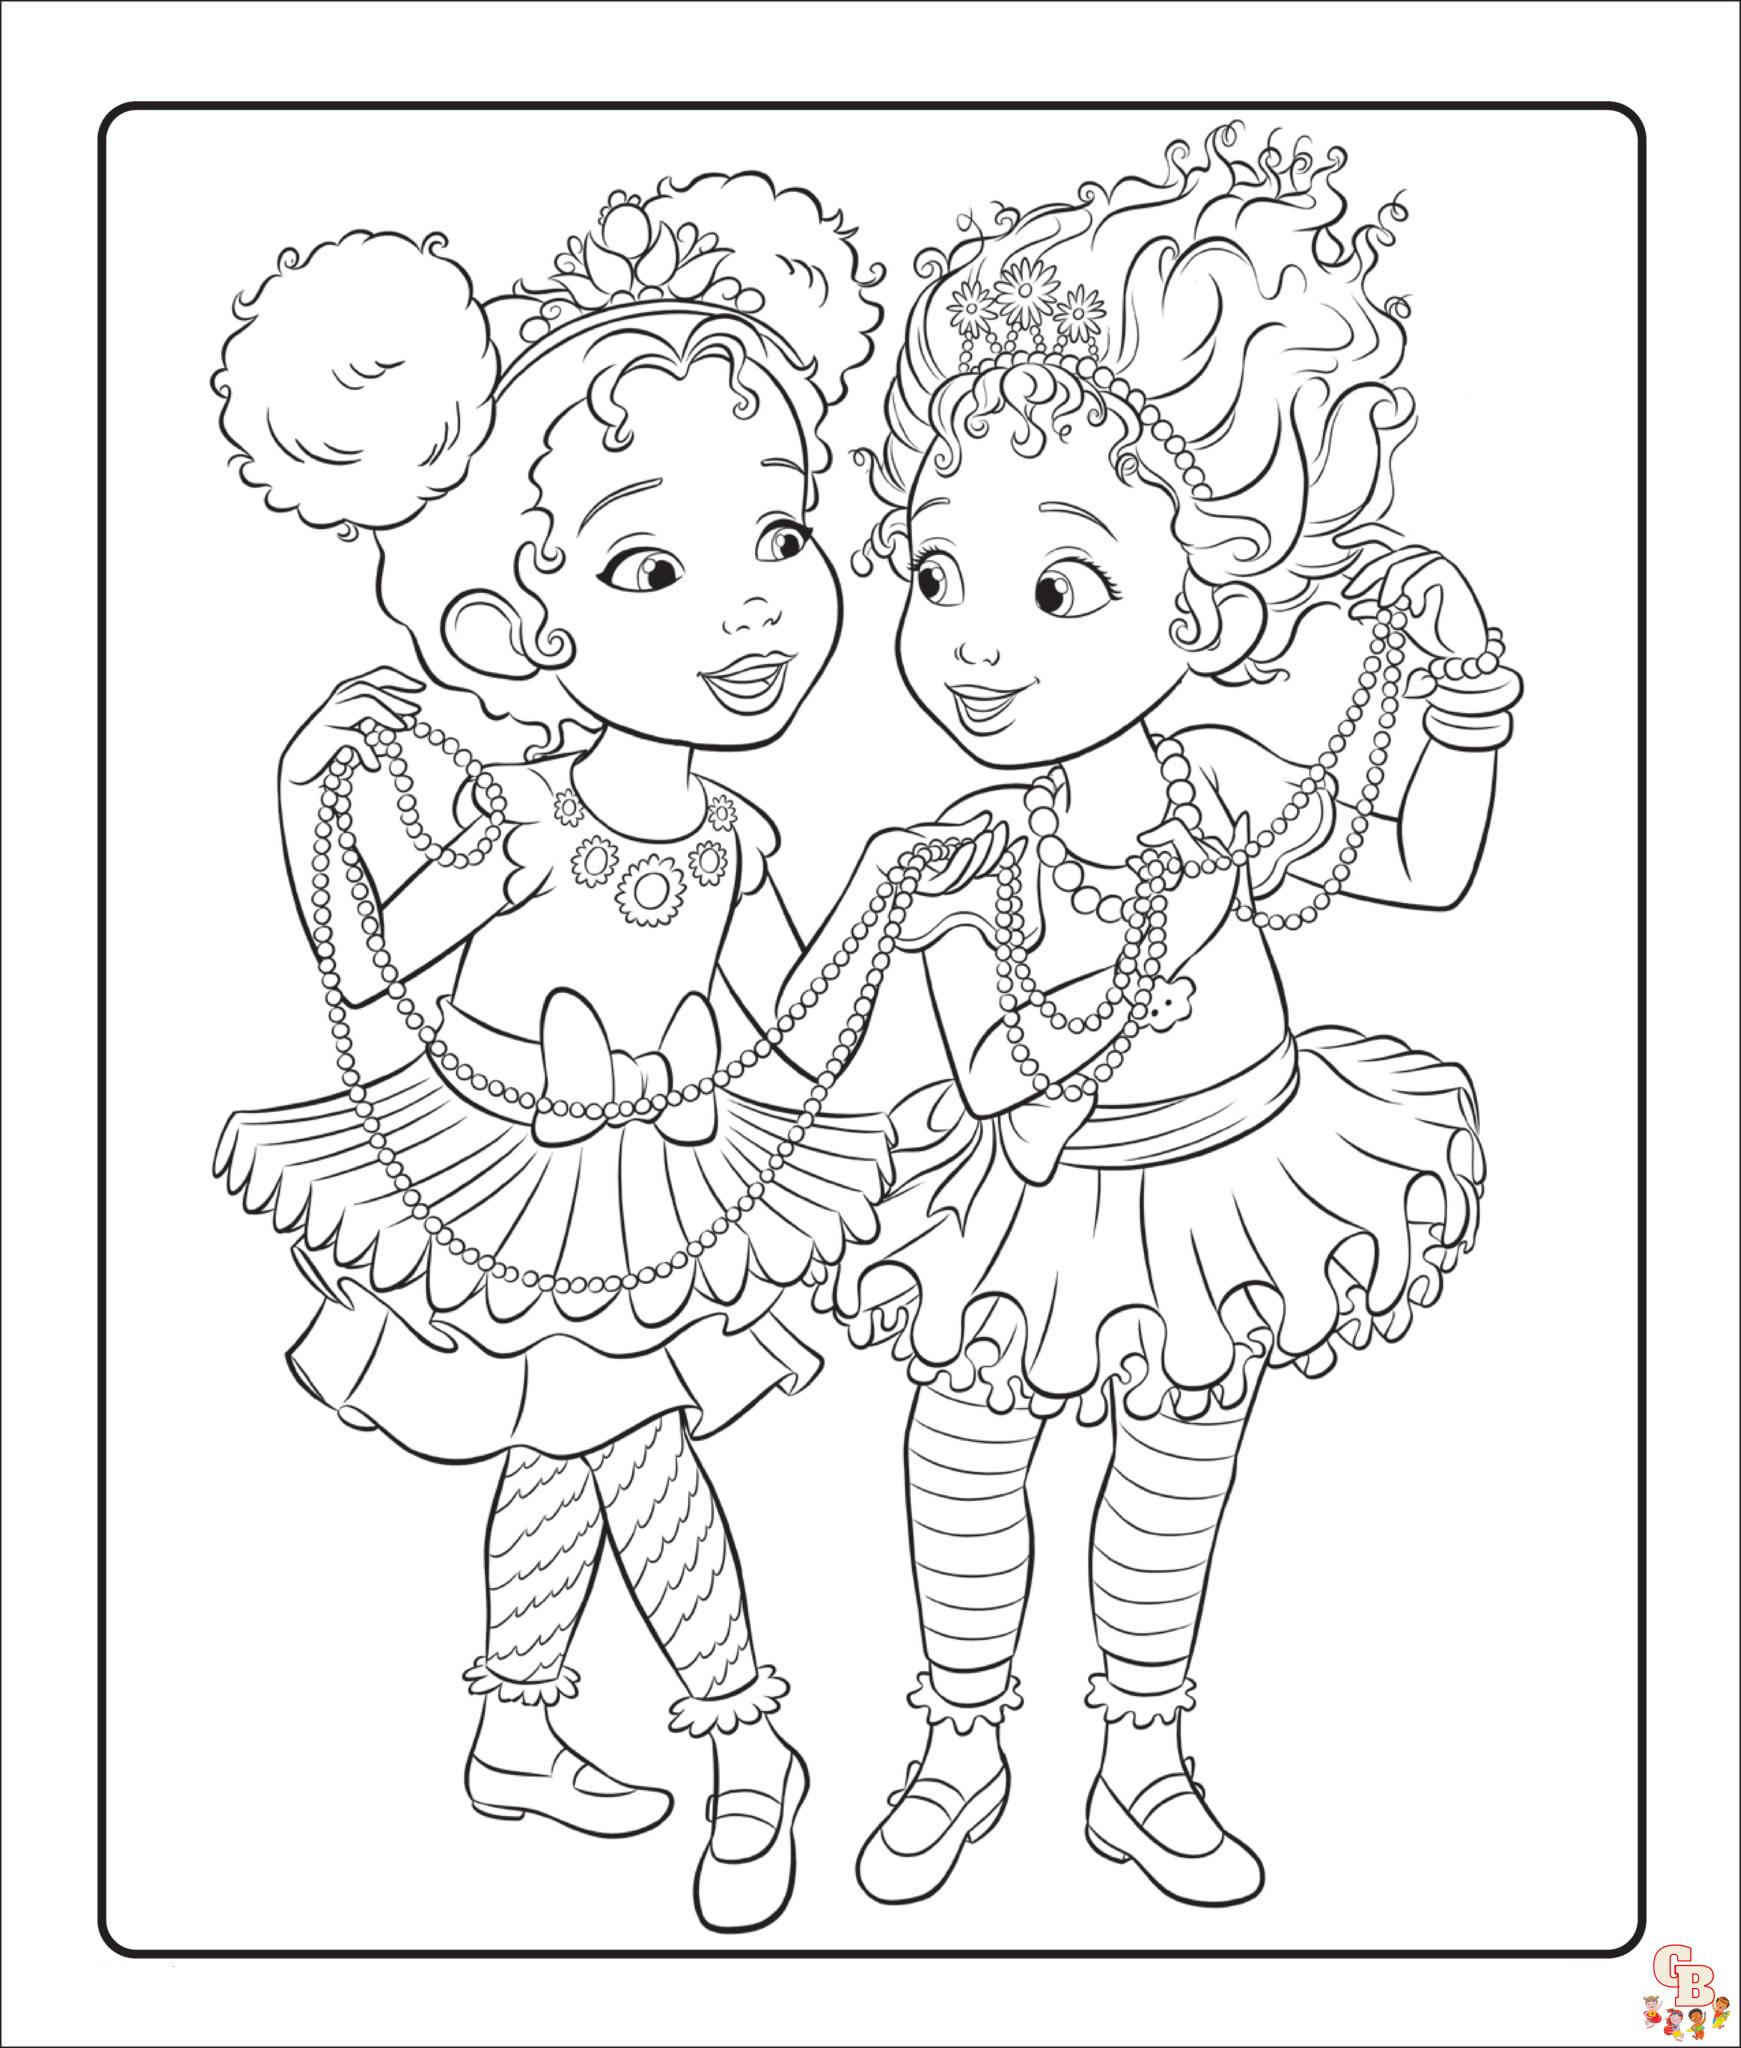 Free Printable Fancy Nancy Coloring Pages for Kids | GBcoloring